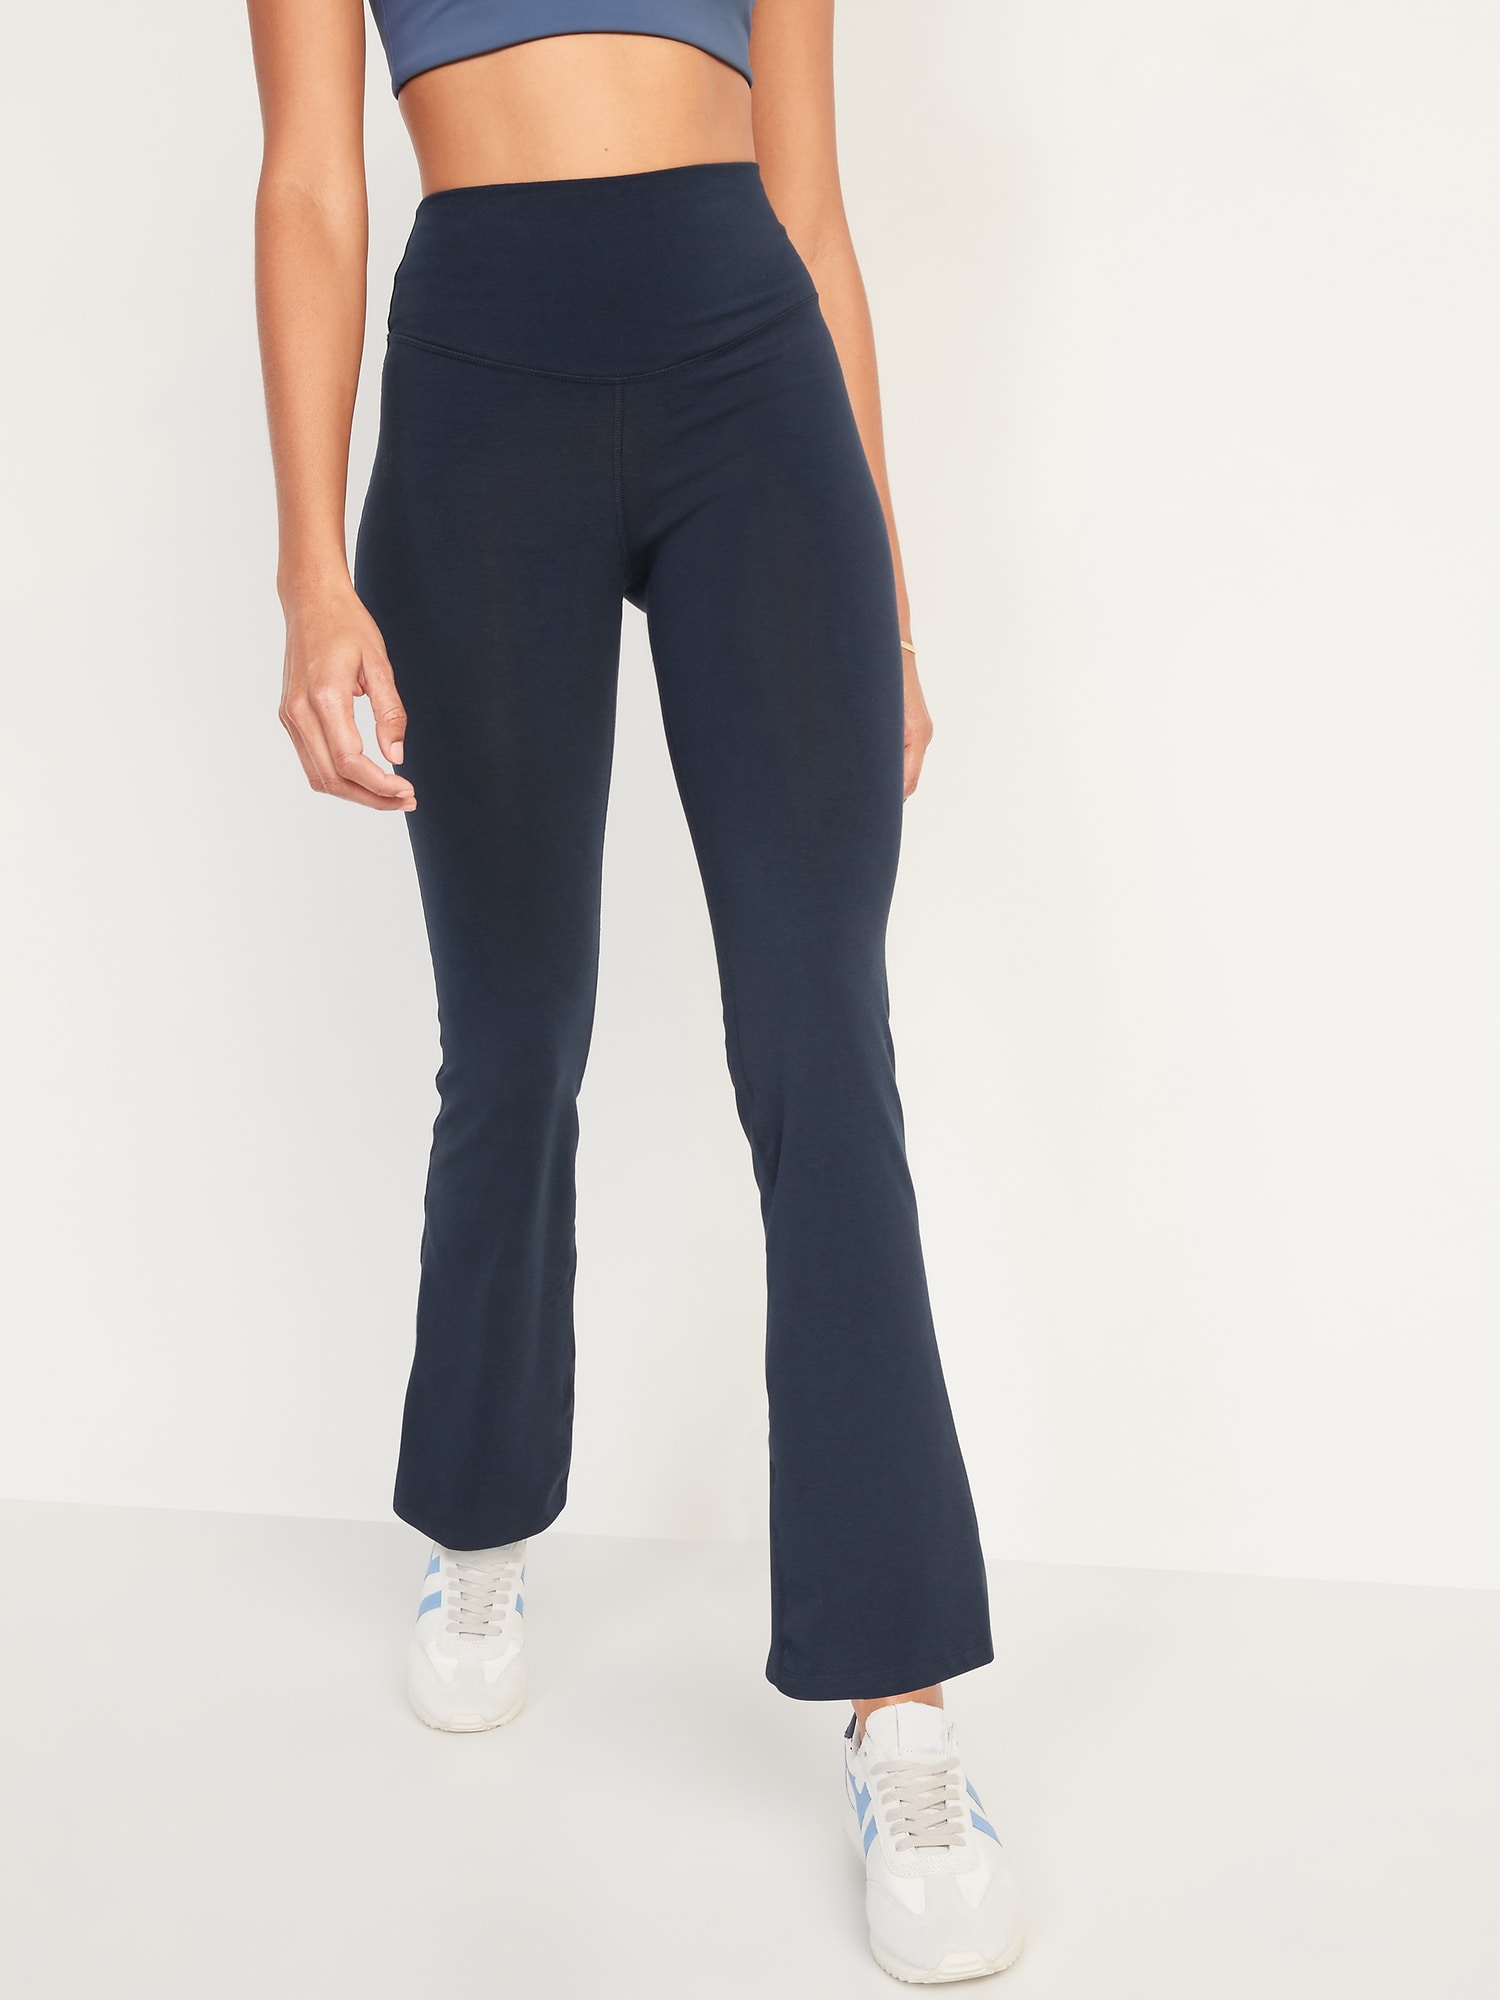 Old Navy Extra High-Waisted PowerChill Hidden-Pocket Flare Pants for Women